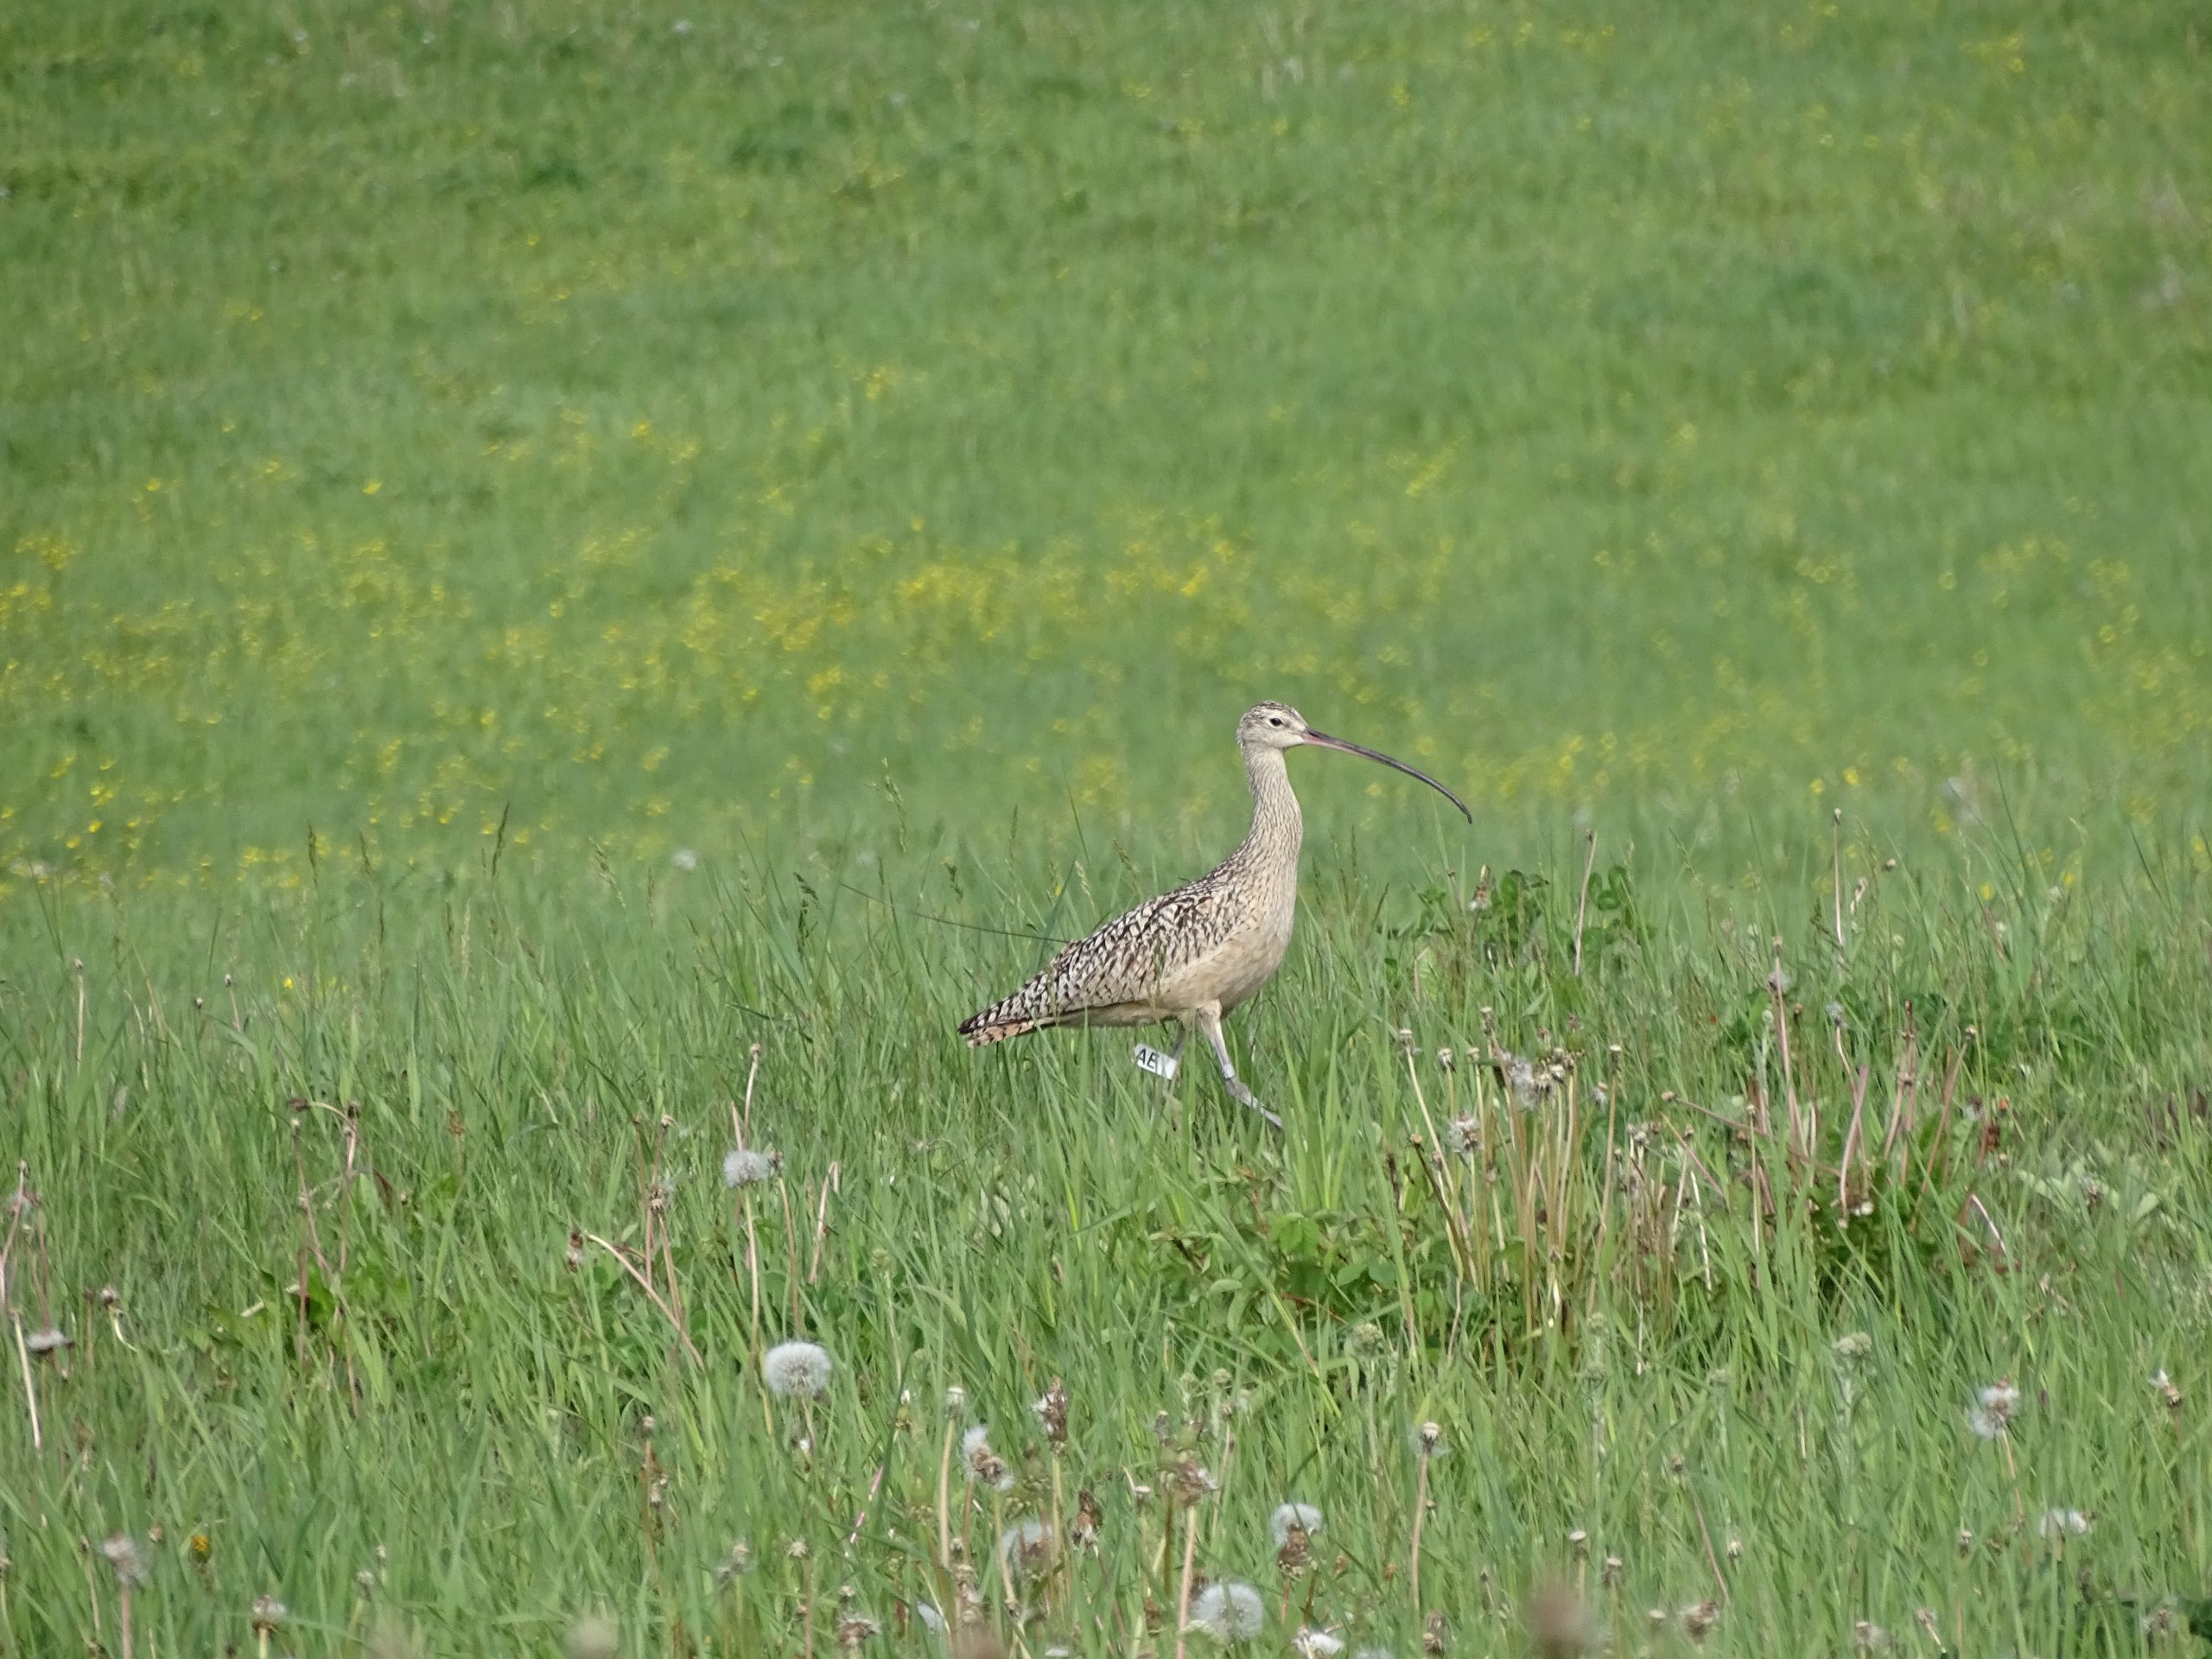 Long-billed Curlew in grassy pasture